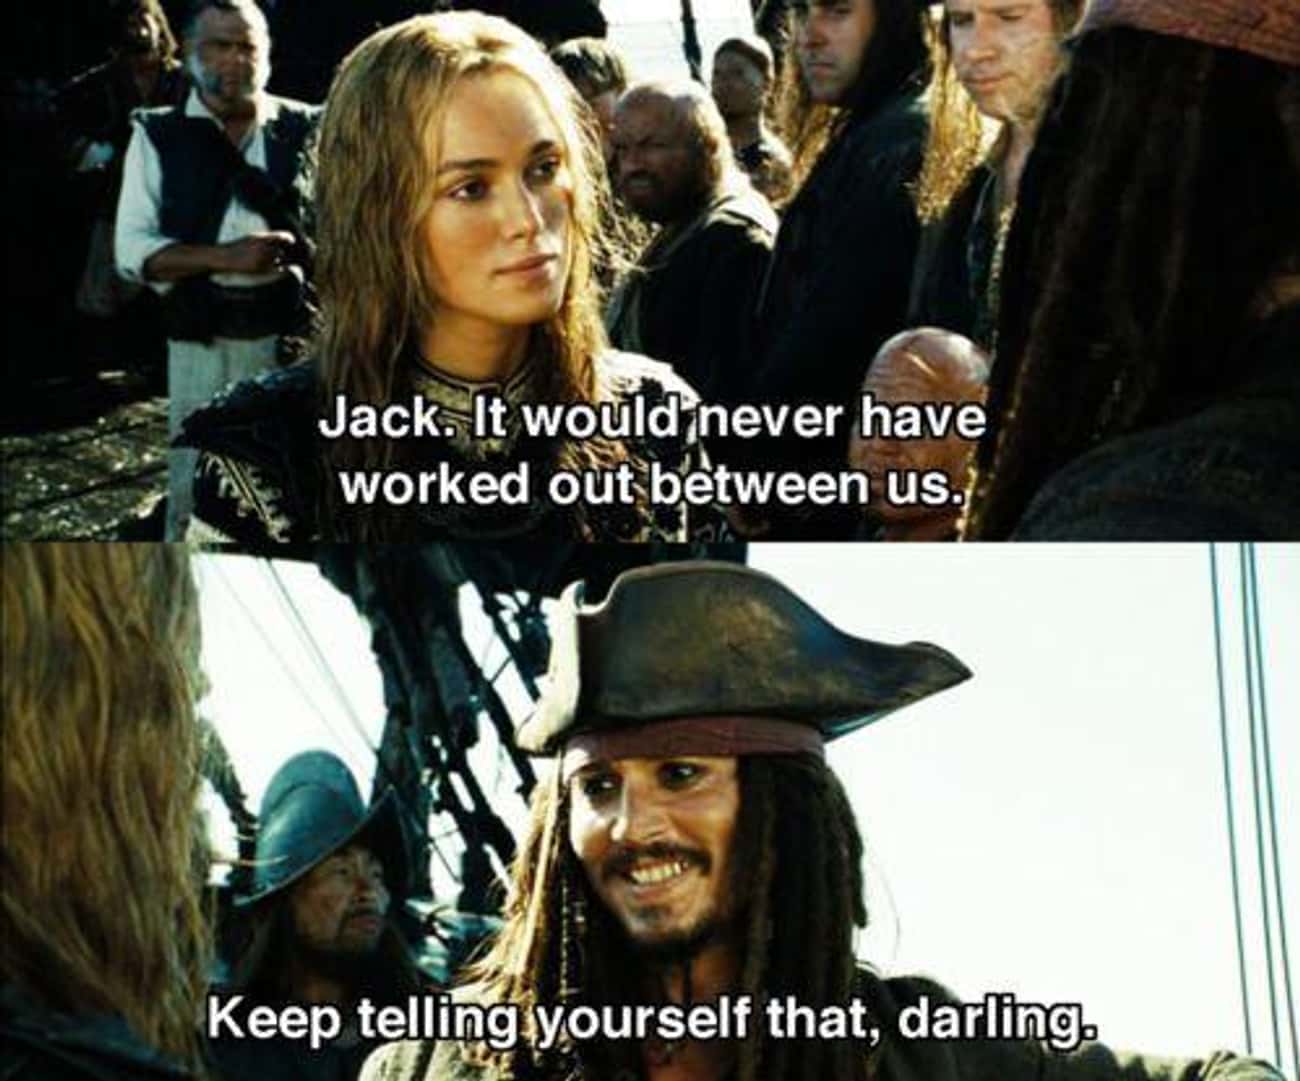 20 Times 'Pirates of the Caribbean' Was 100% Relatable